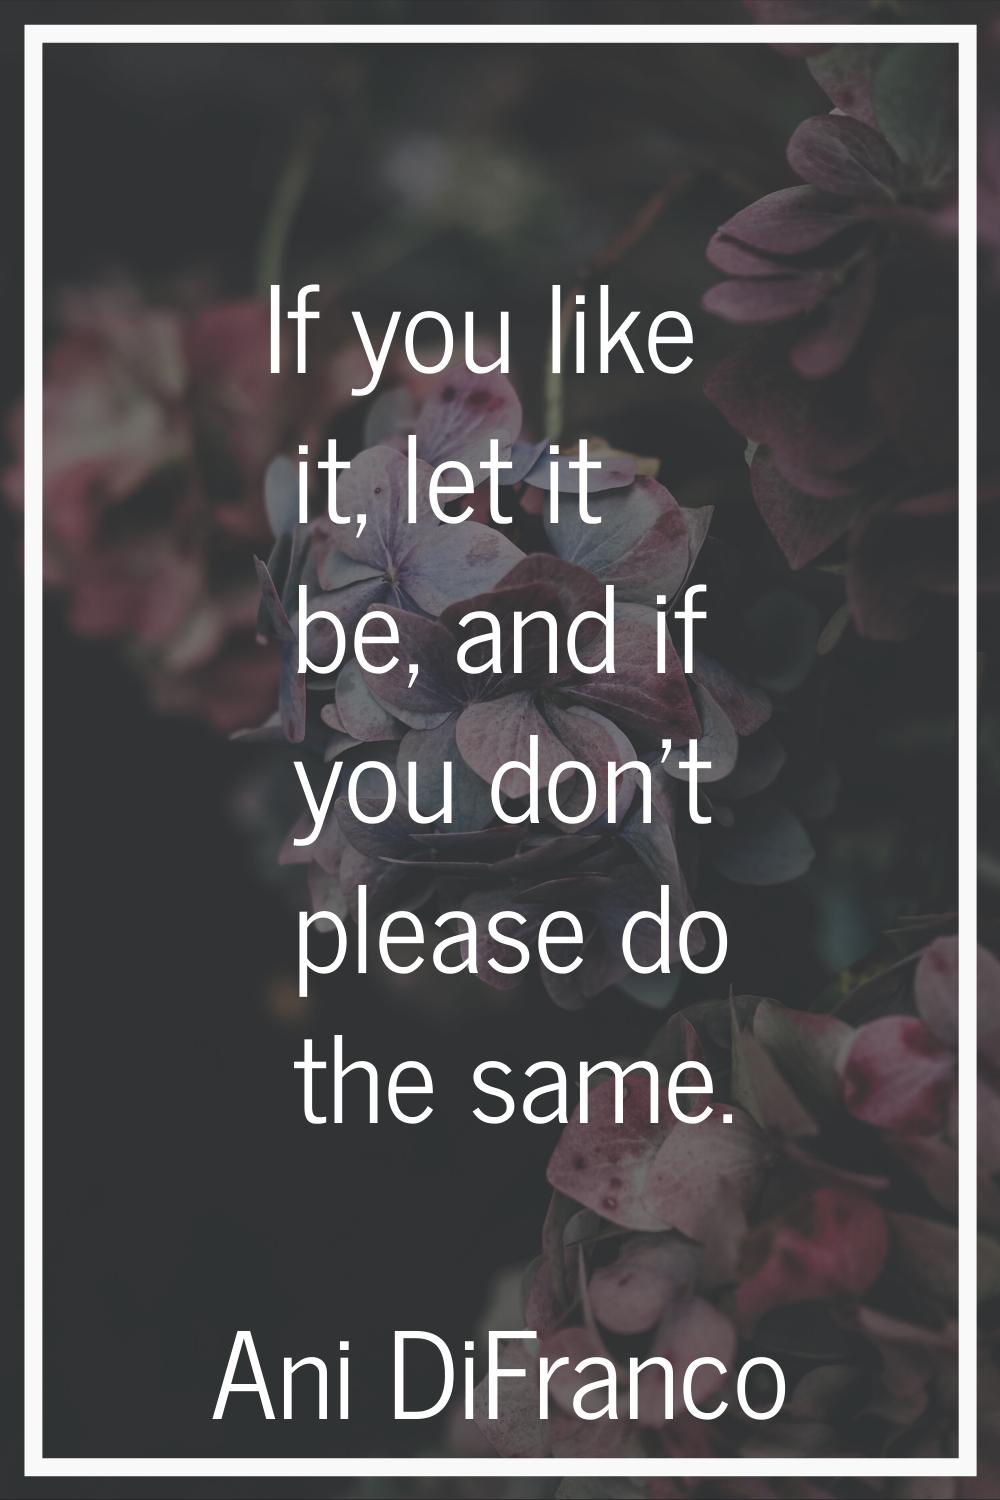 If you like it, let it be, and if you don't please do the same.